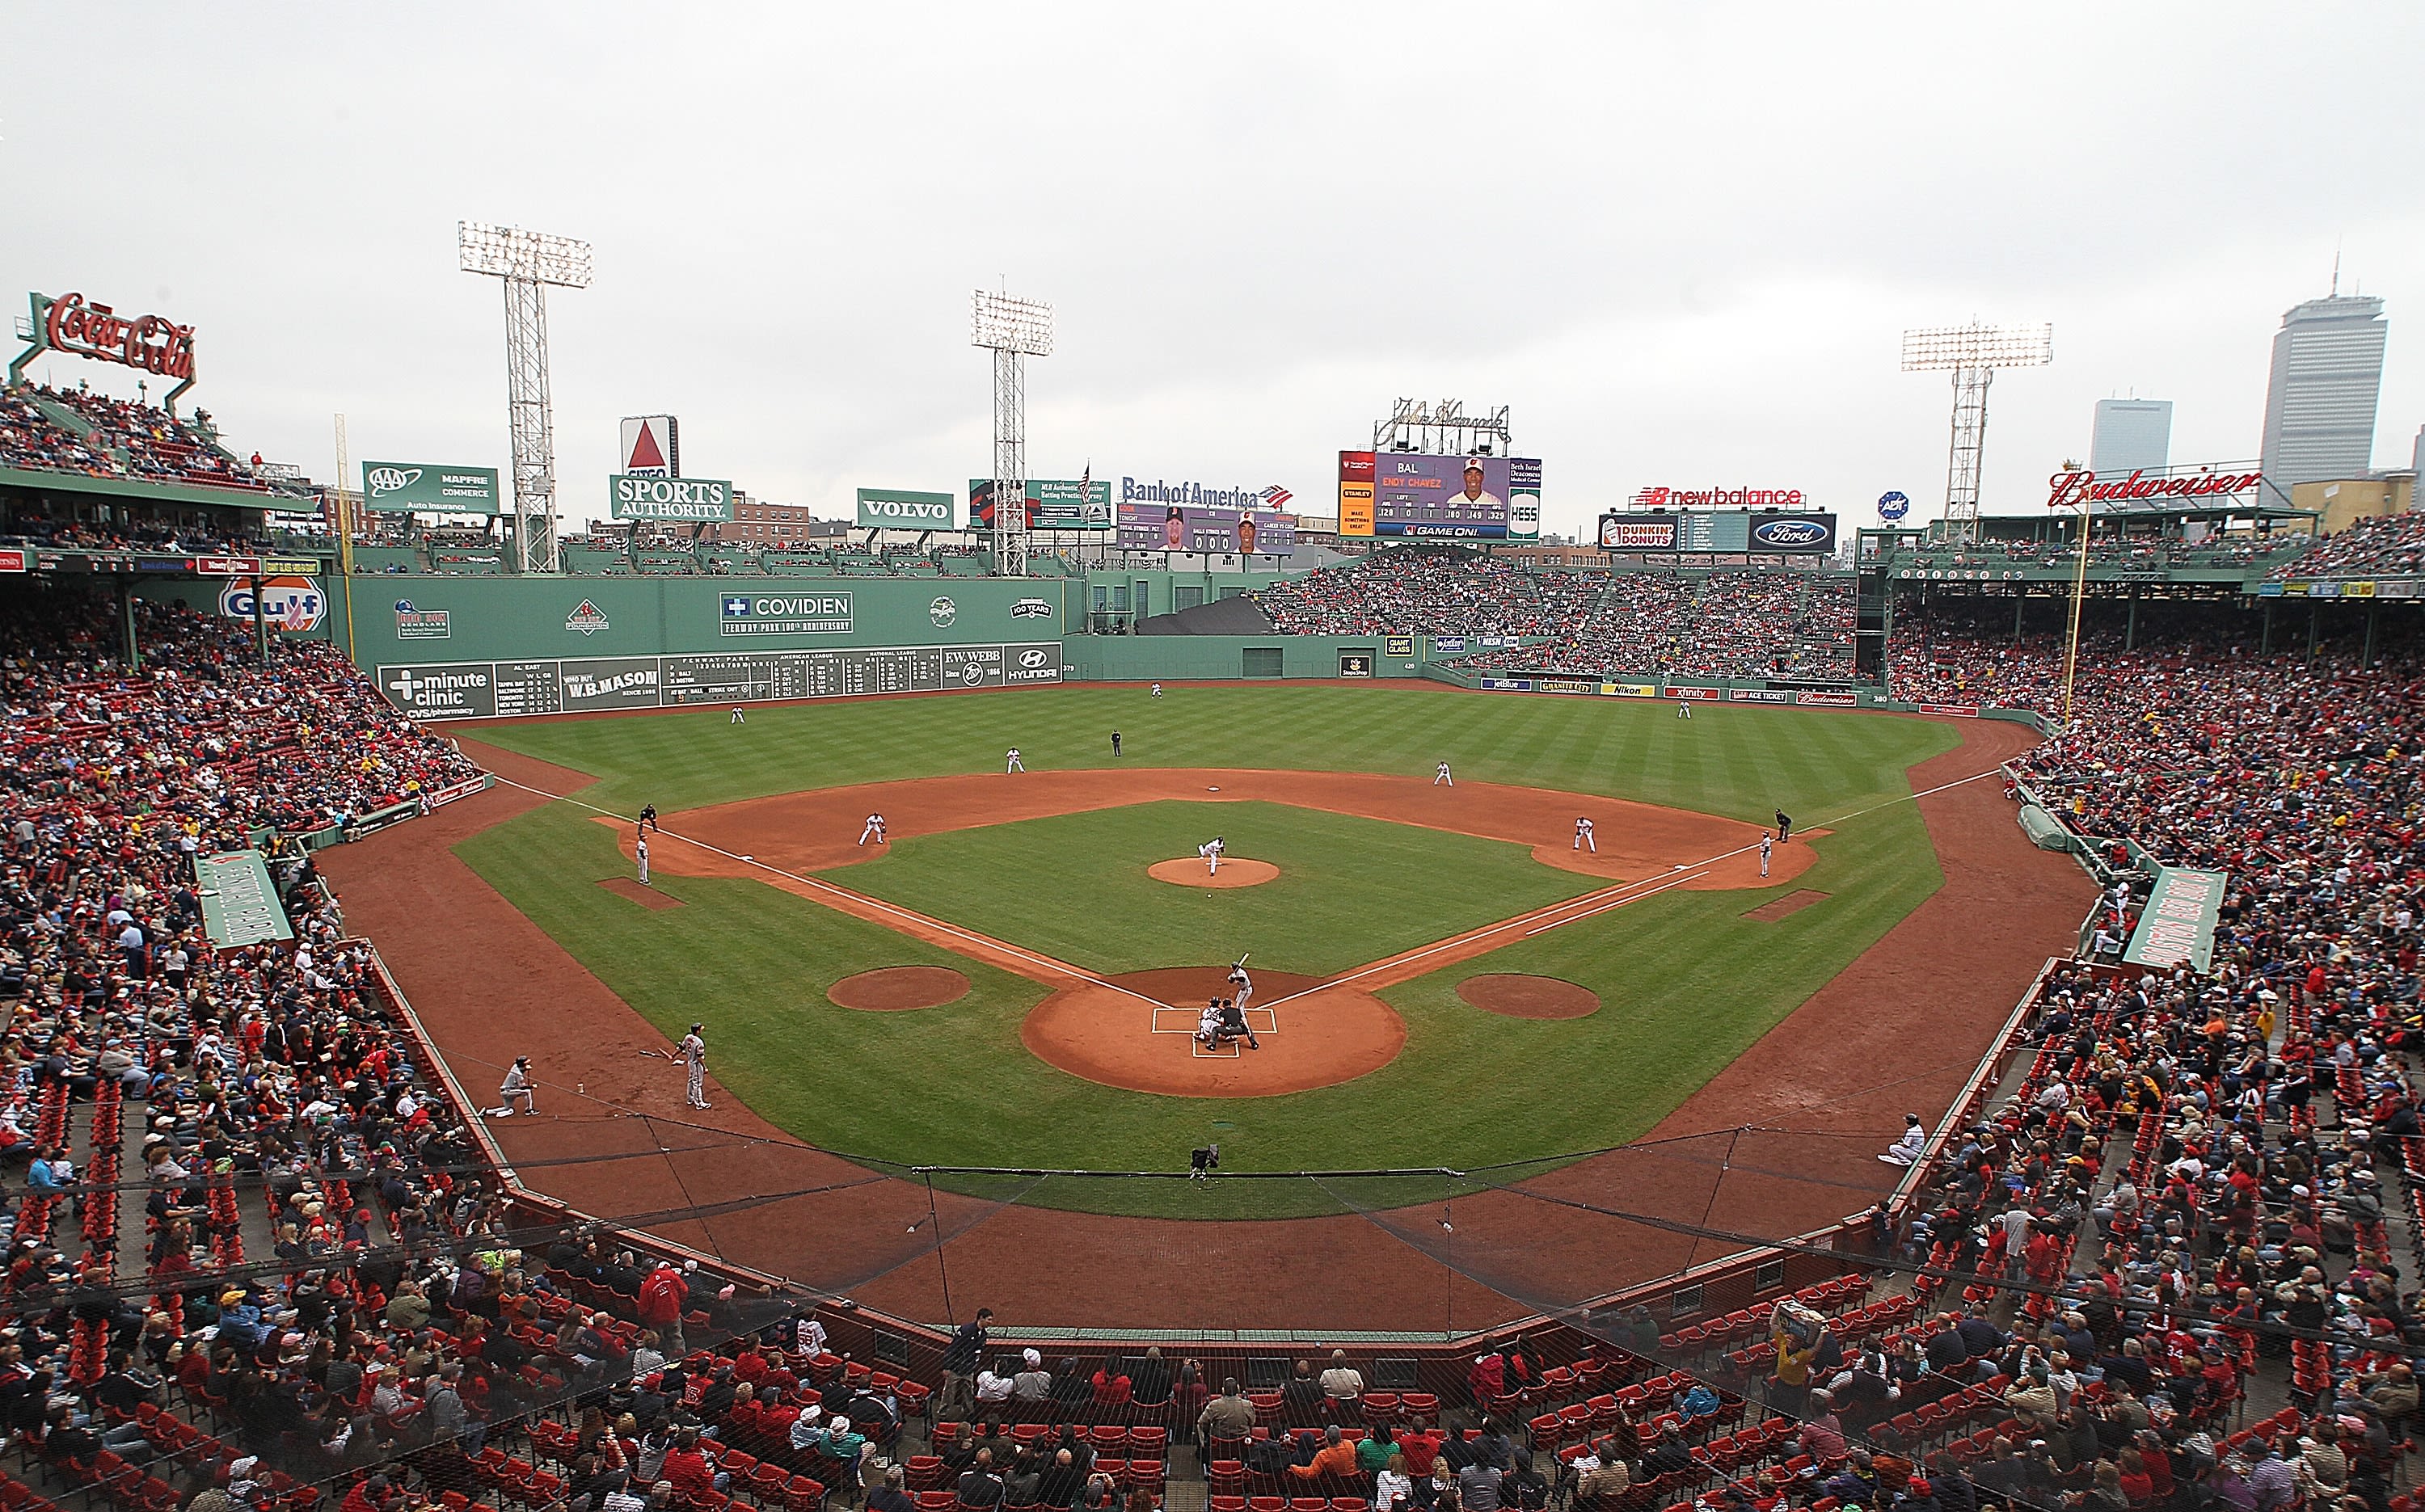 Fenway Park announces new payment system and more ahead of home opener